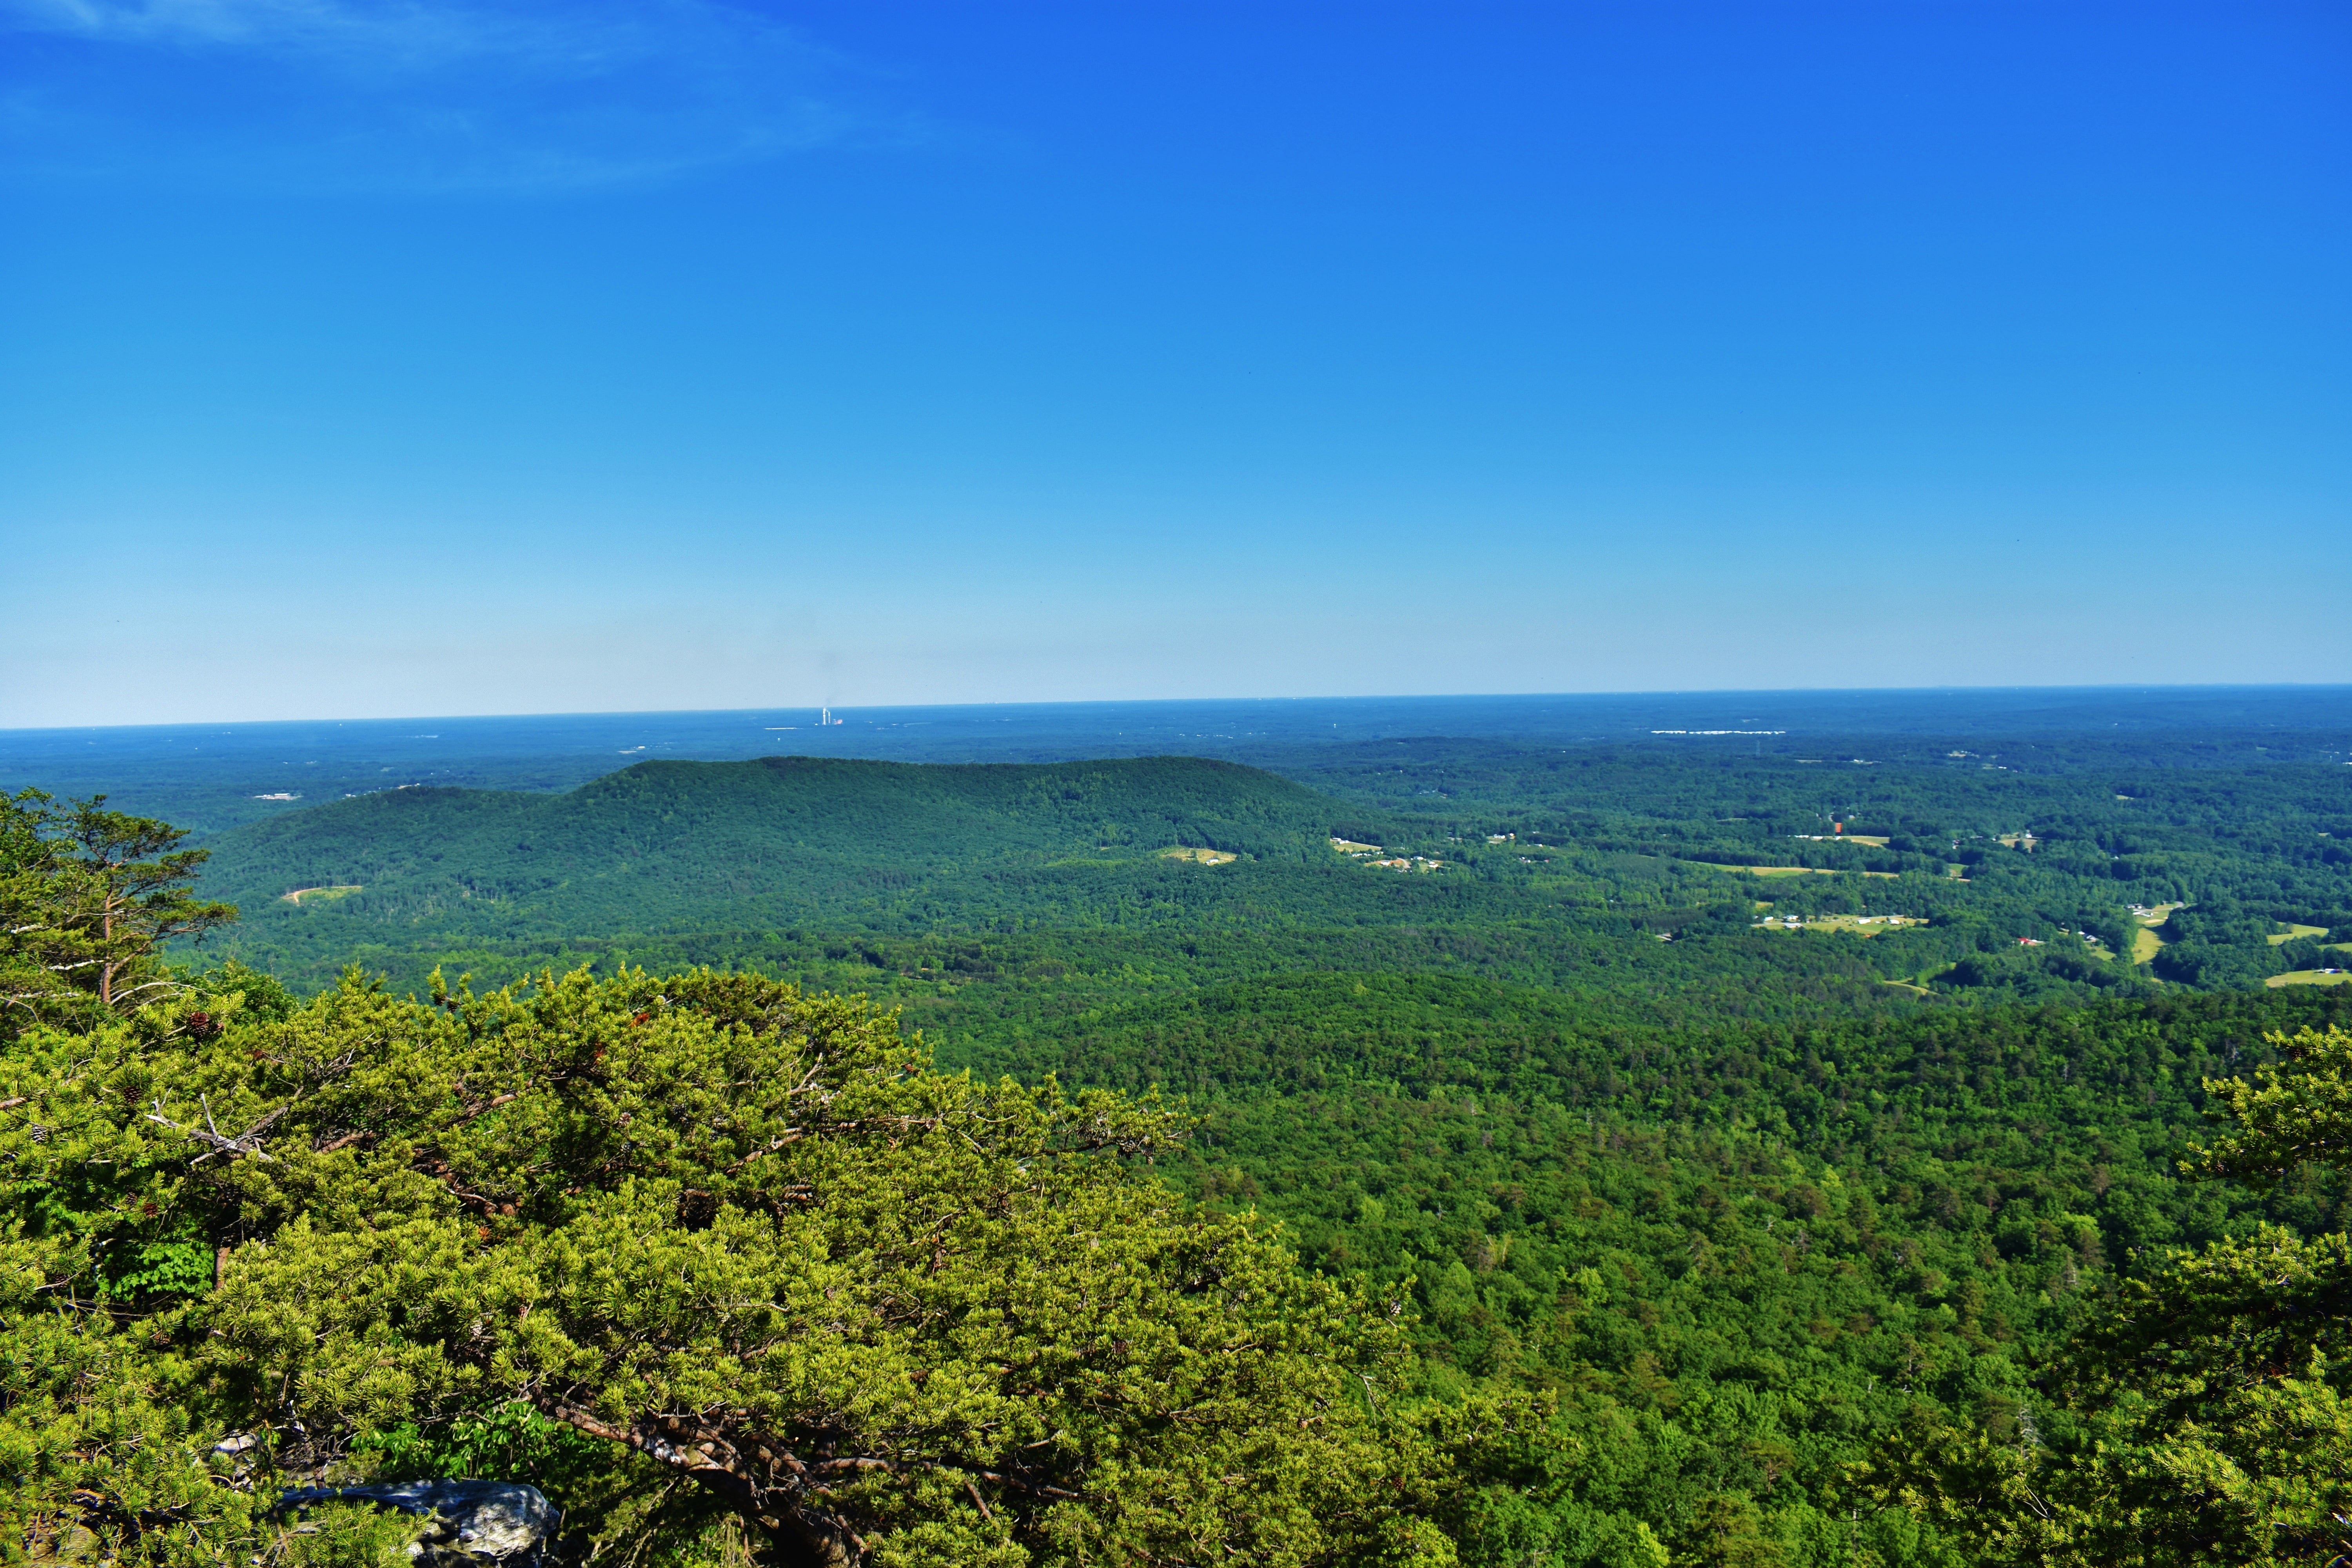 Here is another view from the hanging rock.